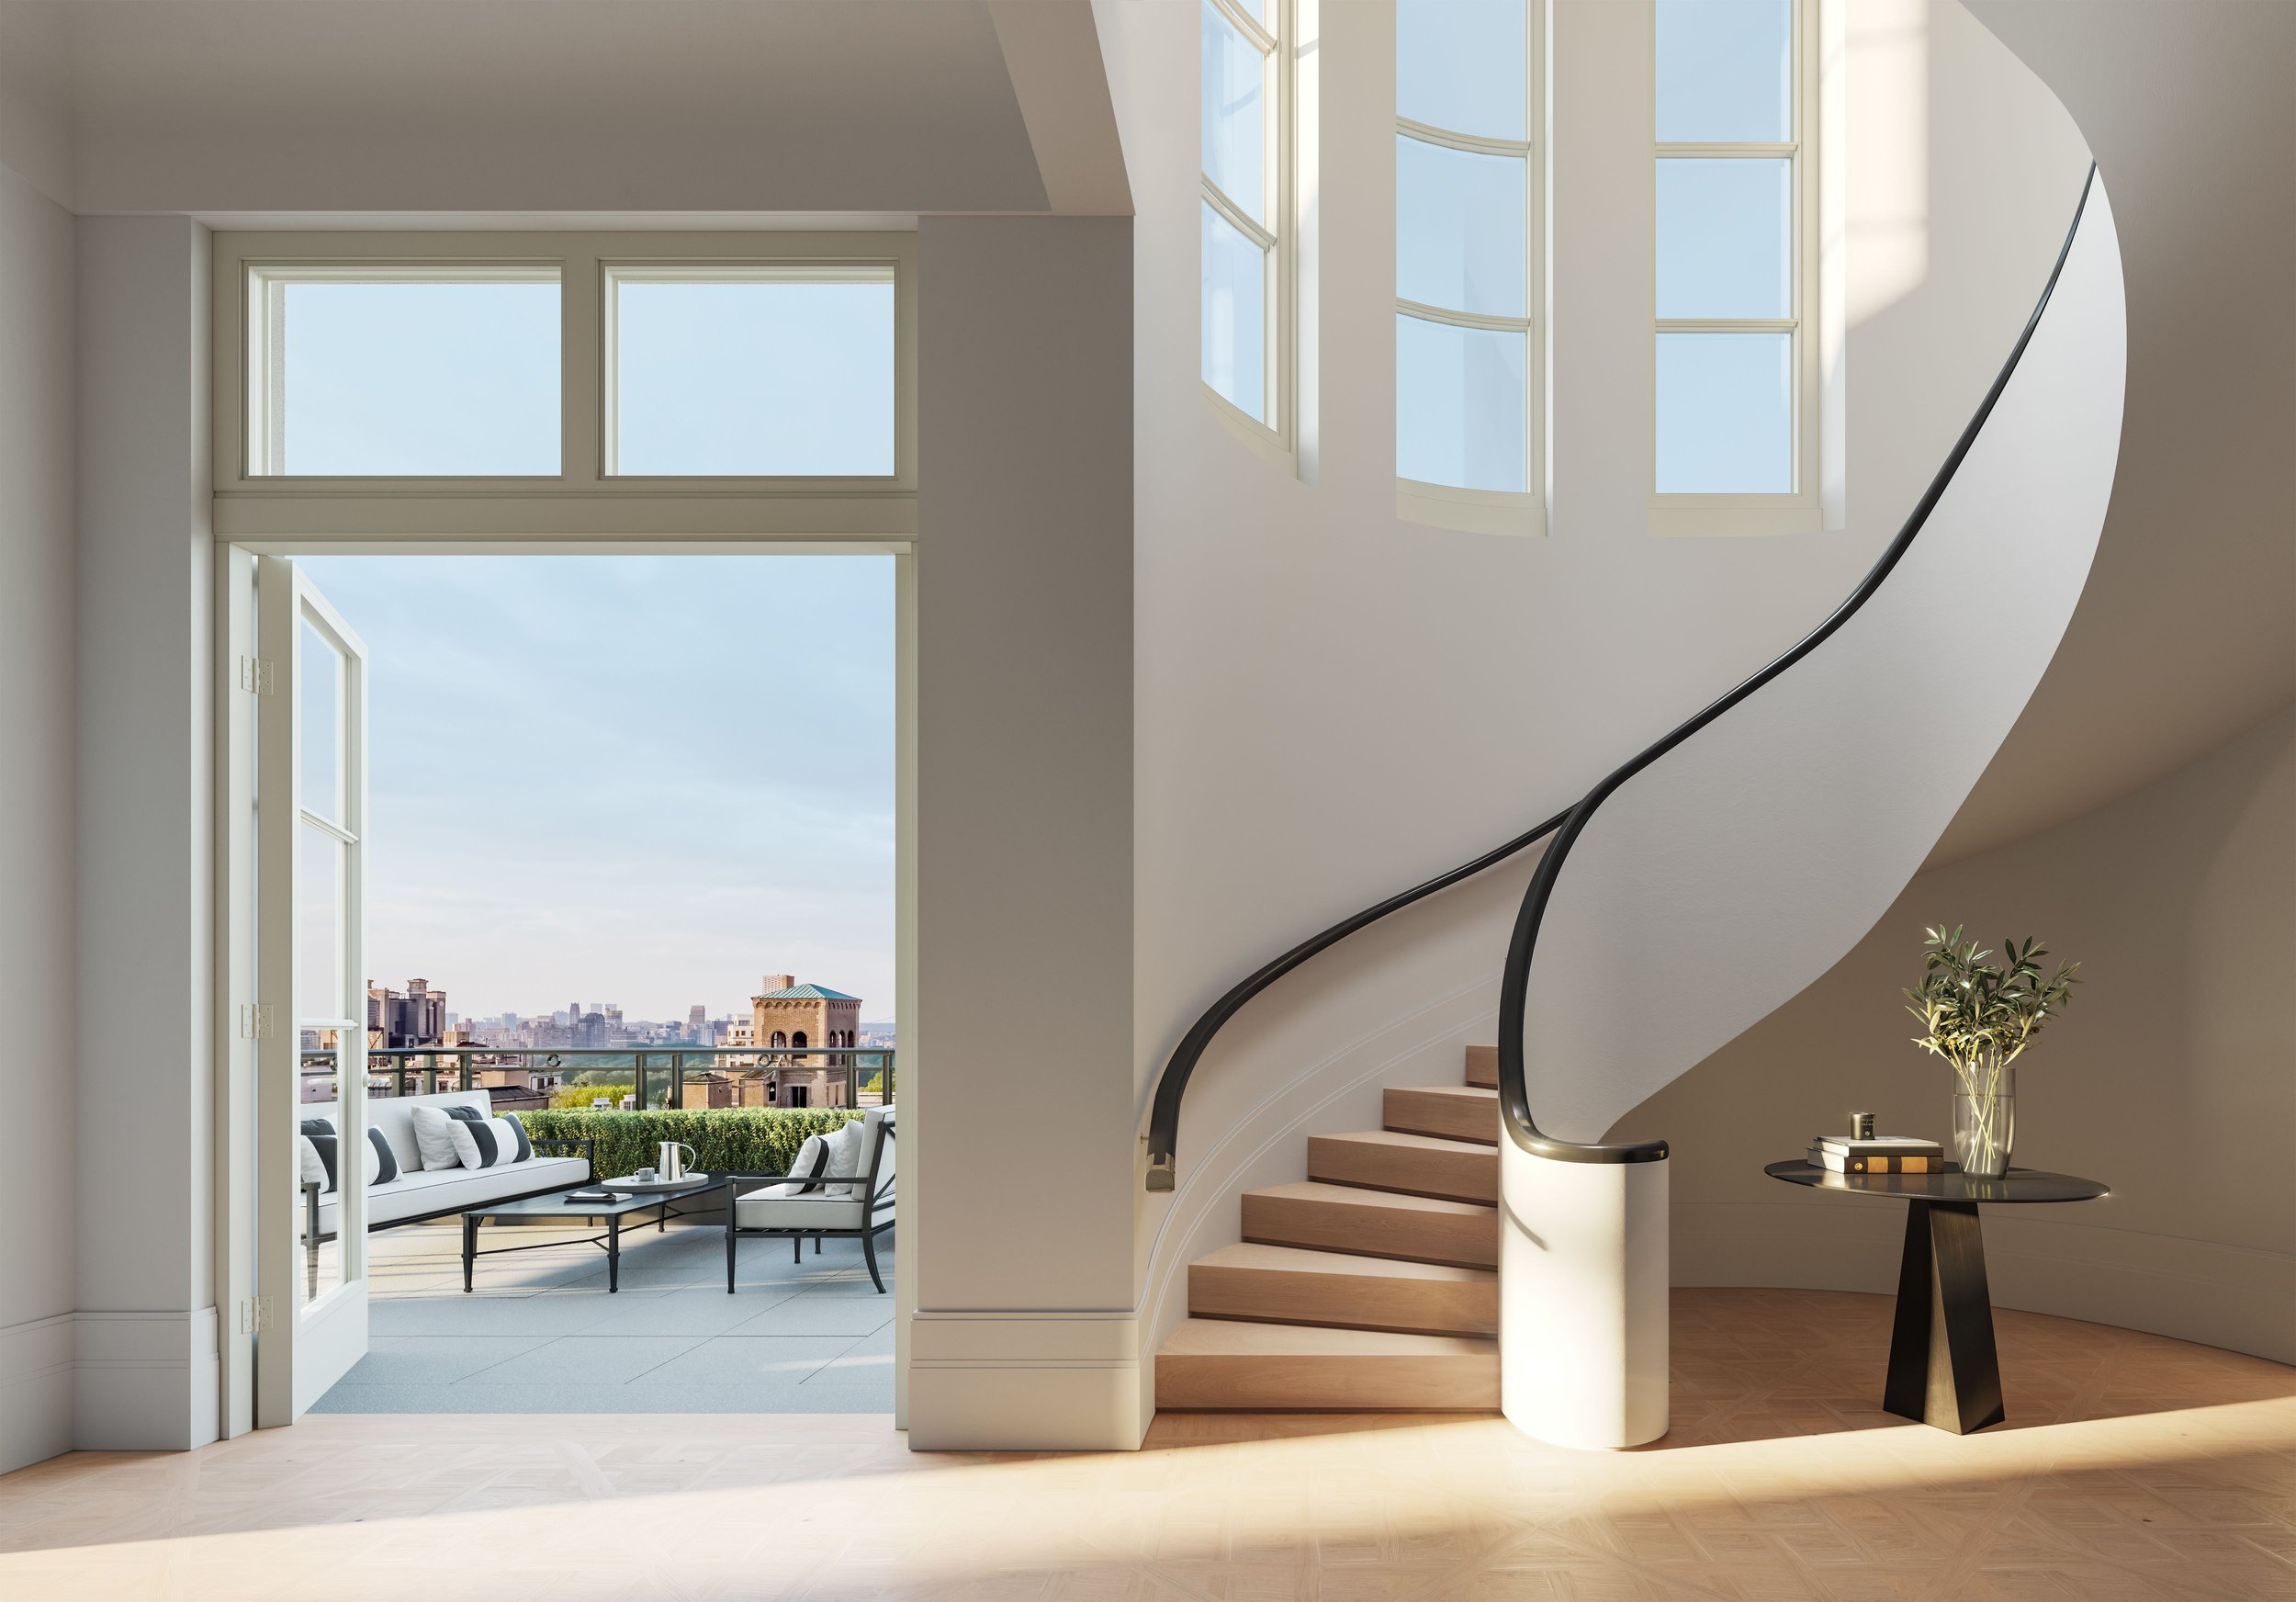  Located on the corner of Madison Avenue and 86th Street and just one block from Central Park, the 13-story, Robert A.M. Stern Architects-designed building creates a new architectural legacy on the Upper East Side. Reminiscent of the neighborhood’s d